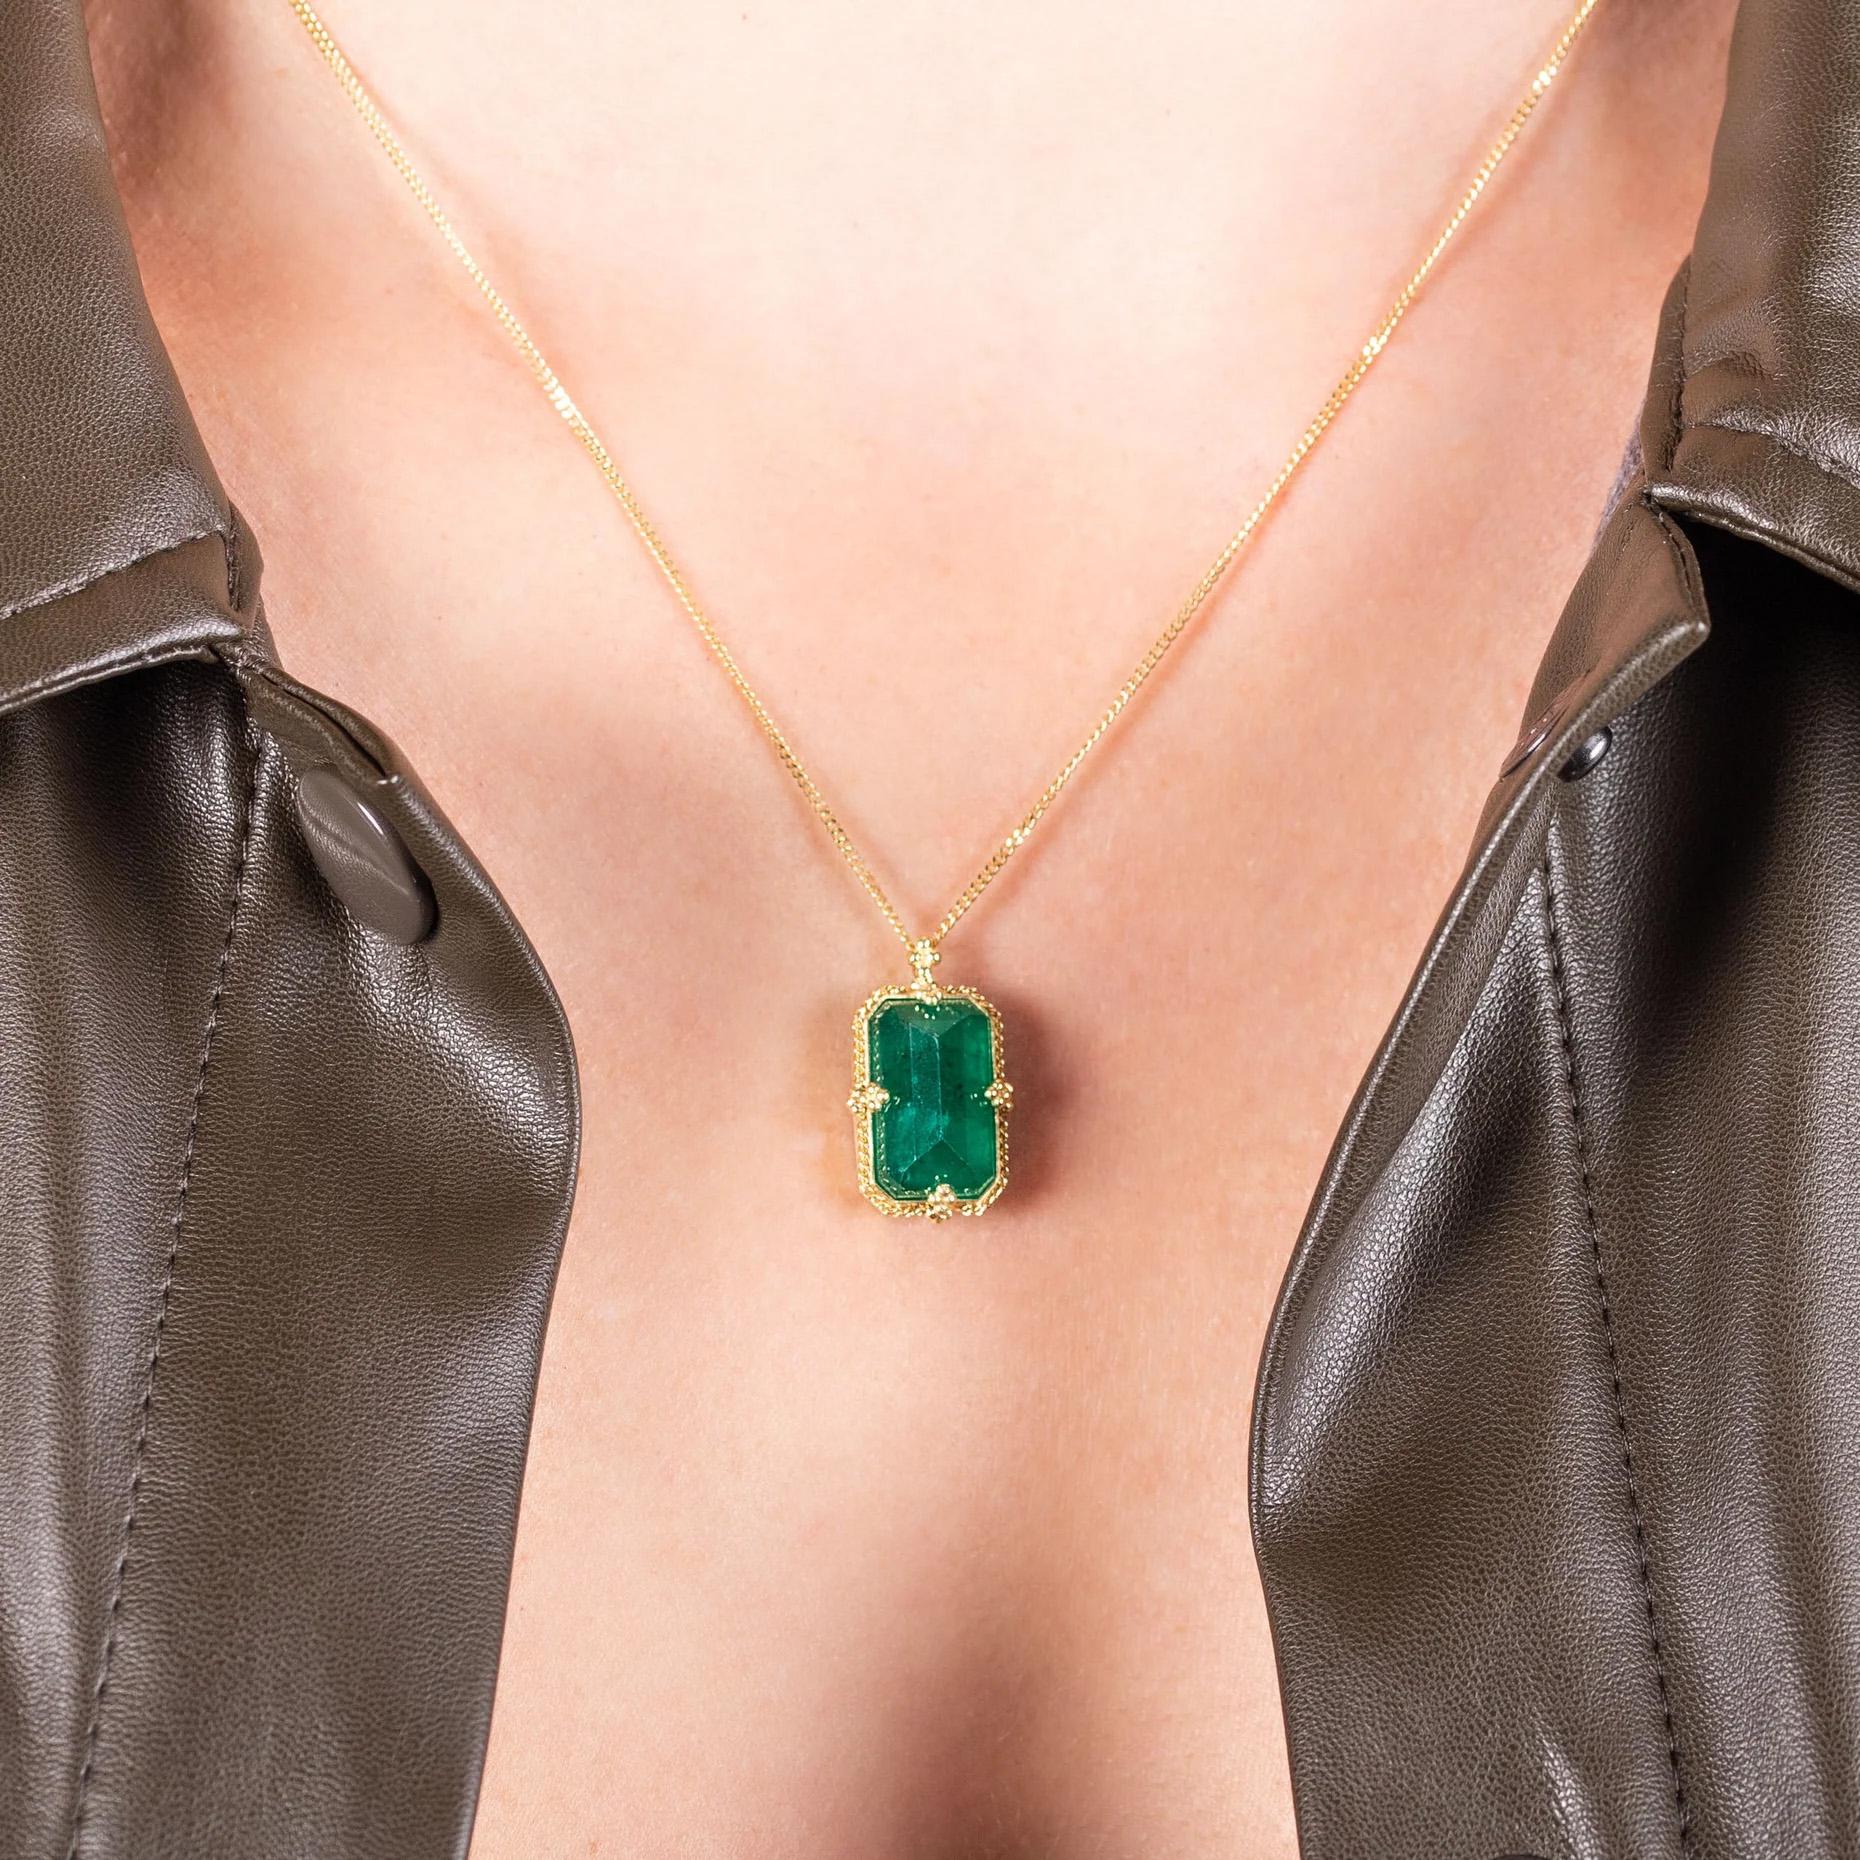 This pendant features a lush rectangular Emerald, the verdant gem’s rich natural hue glowing like new leaves in the hopeful light of springtime. This vibrant stone is set in our signature handmade gold bezel pendant with braided detail and suspended